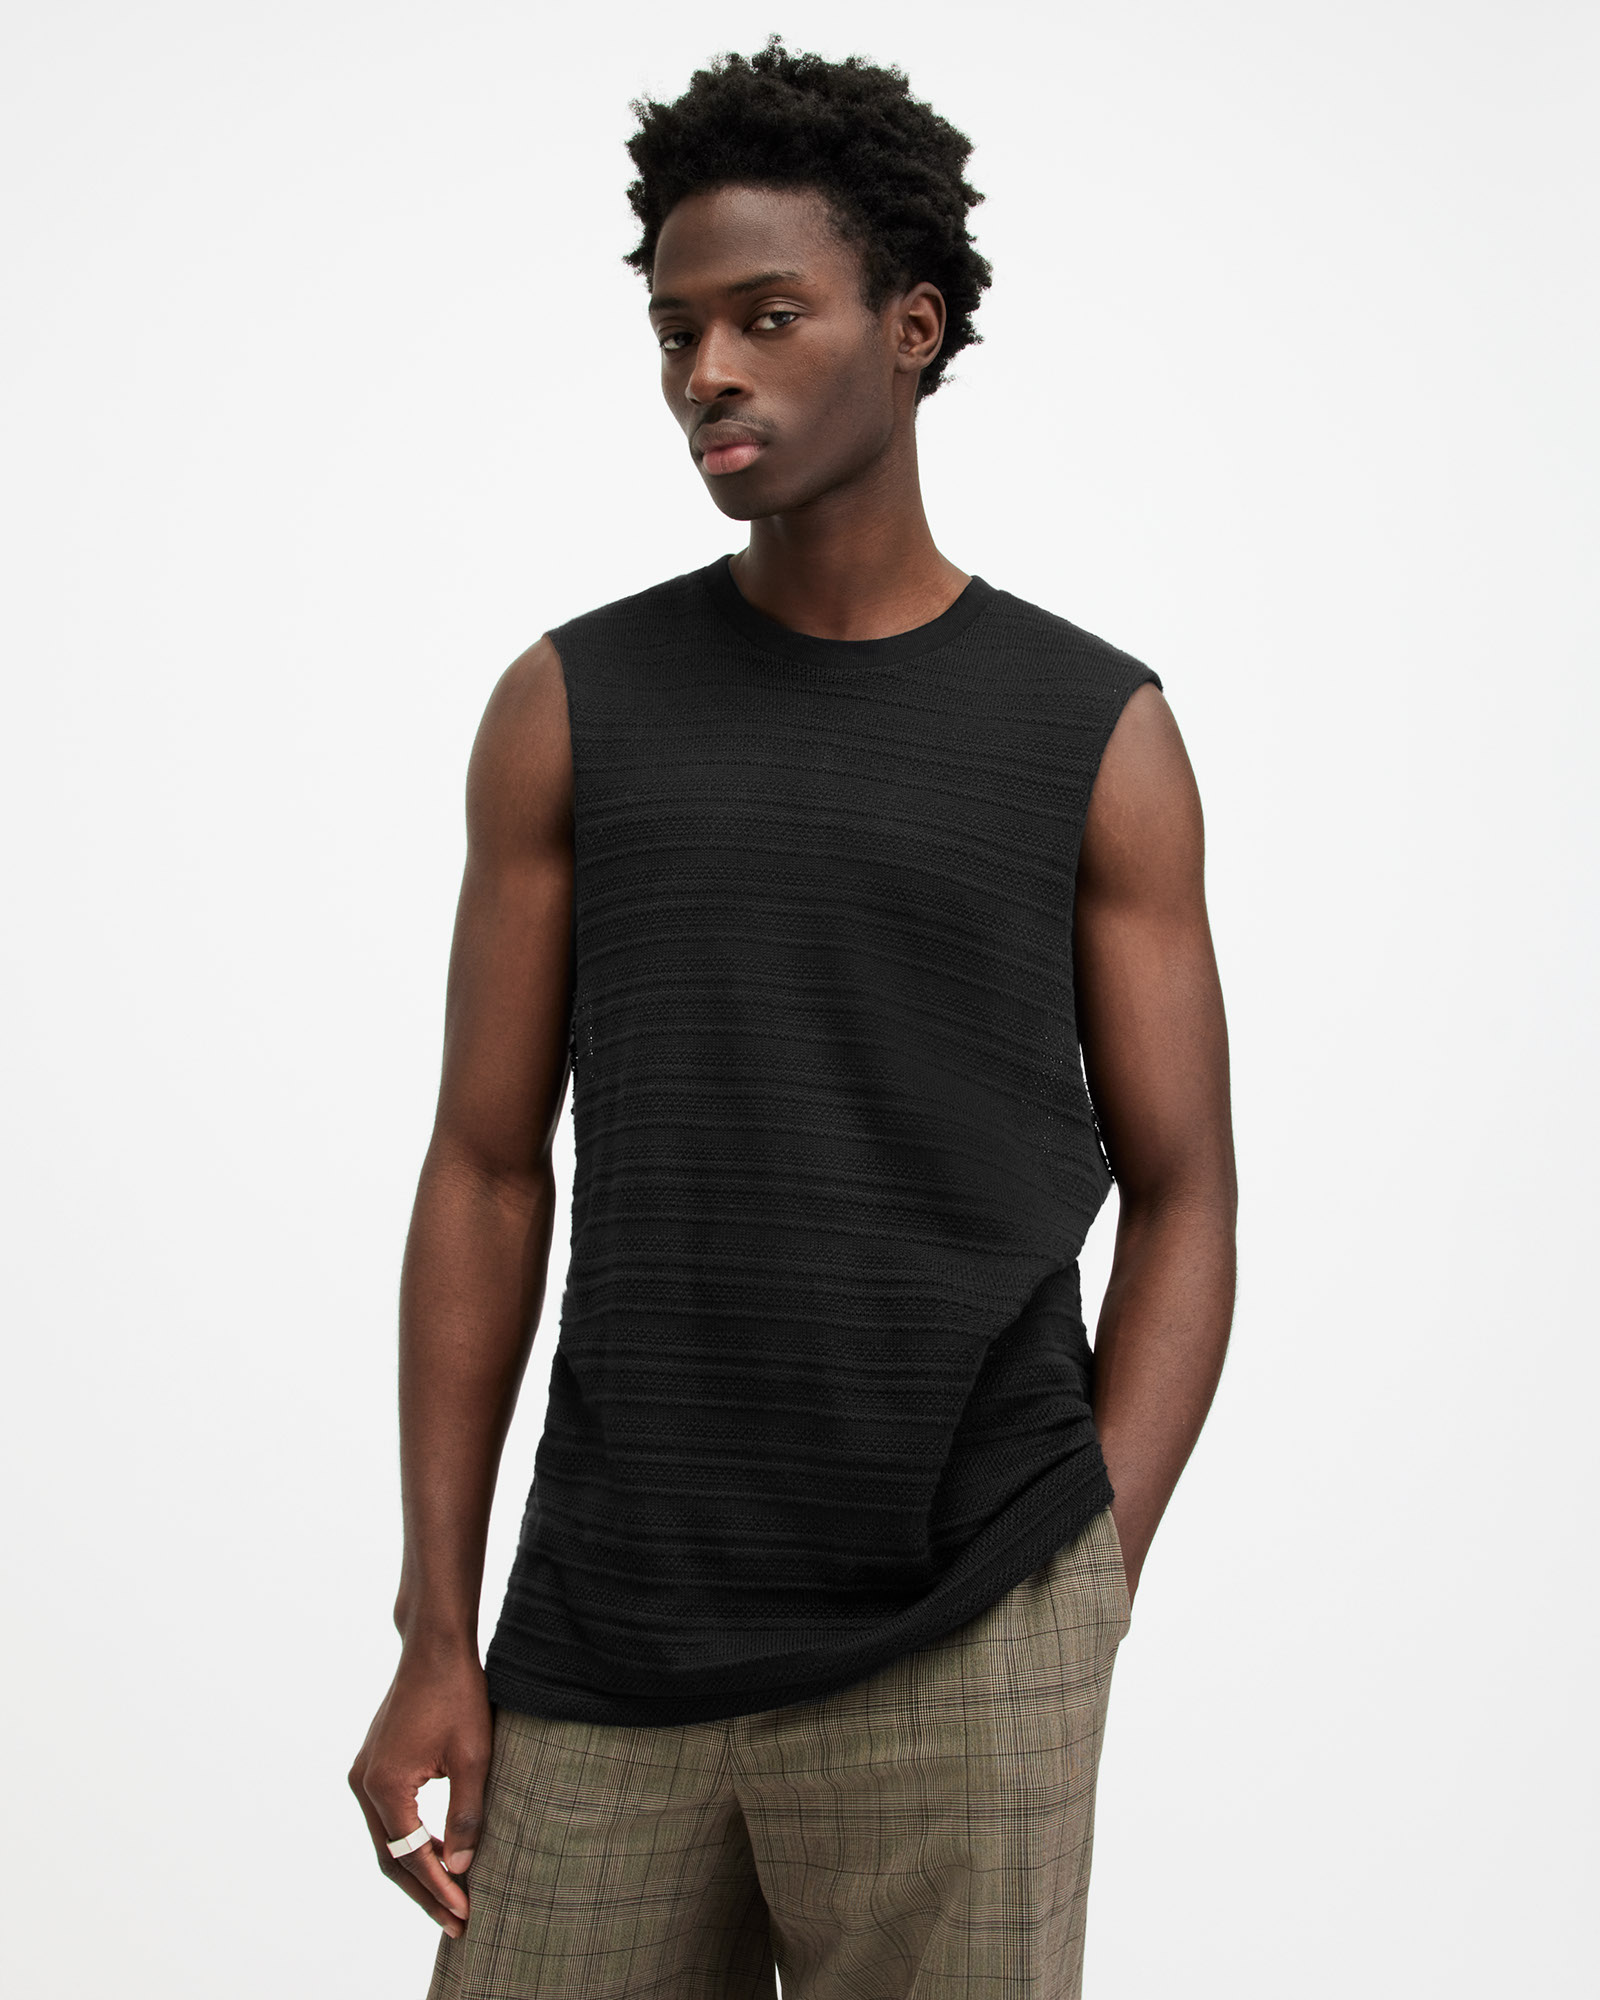 AllSaints Drax Sleeveless Relaxed Fit Vest Top,, Jet Black